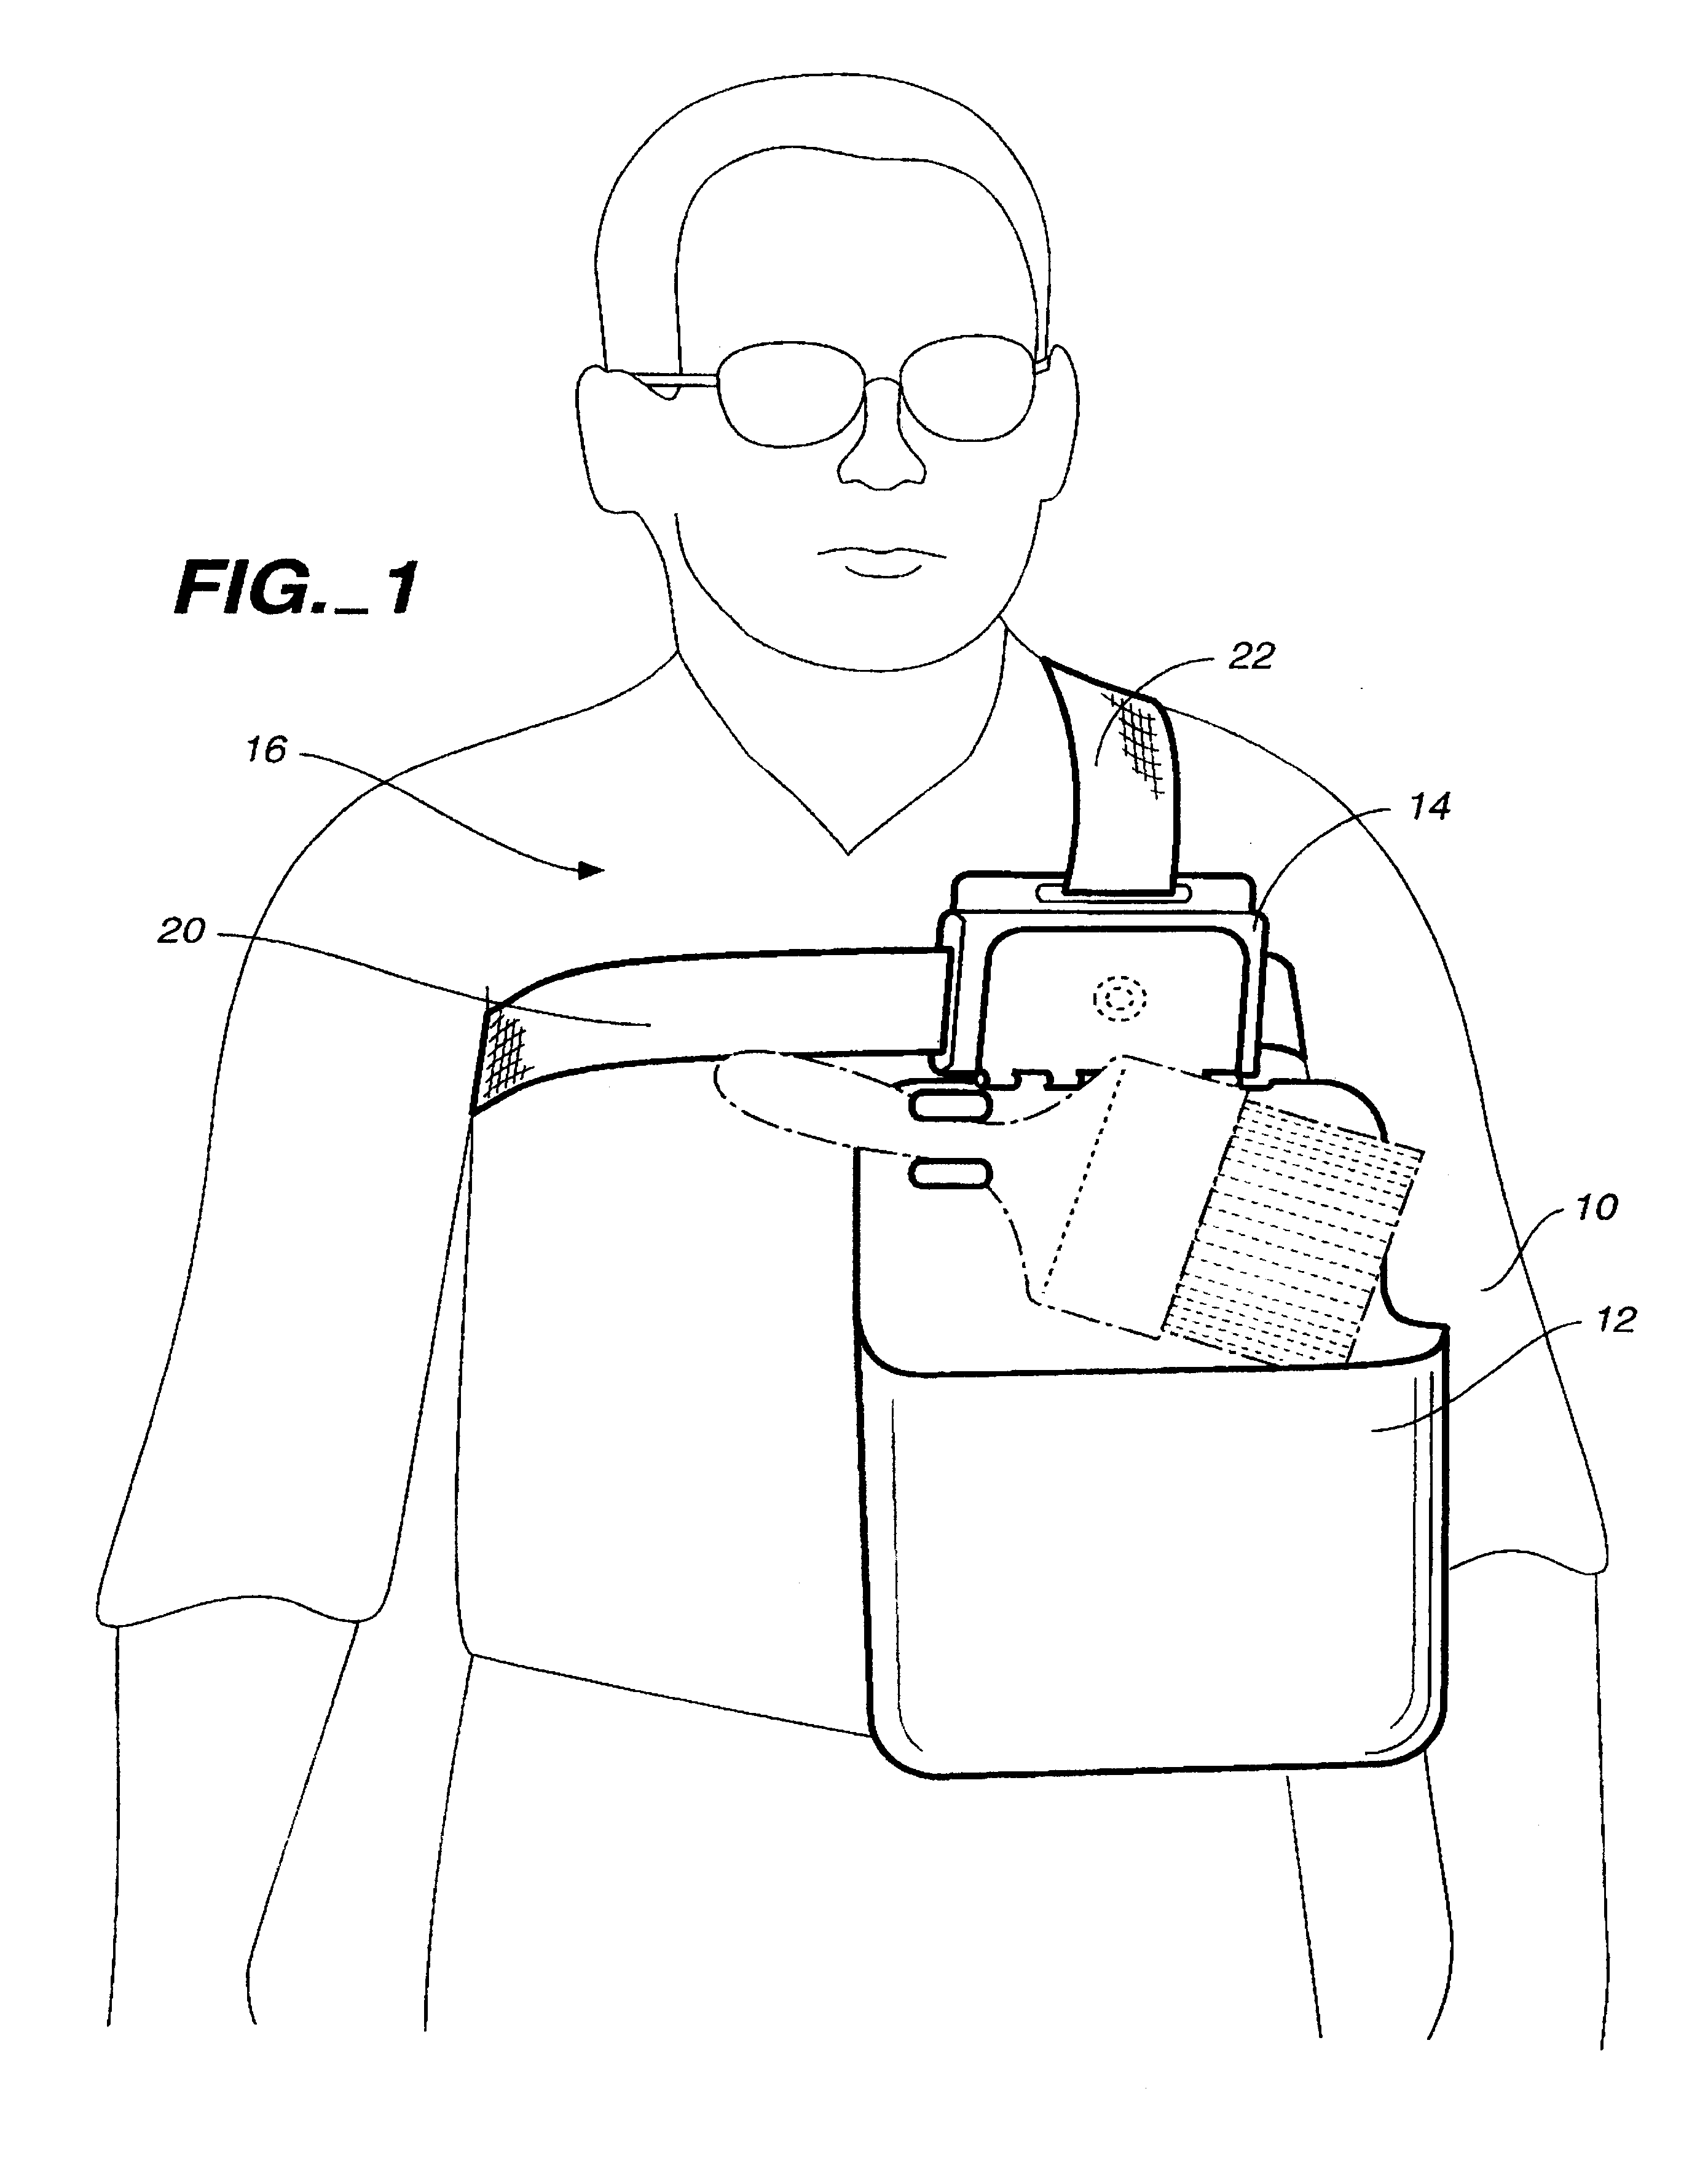 Chest-mounted paint carrier